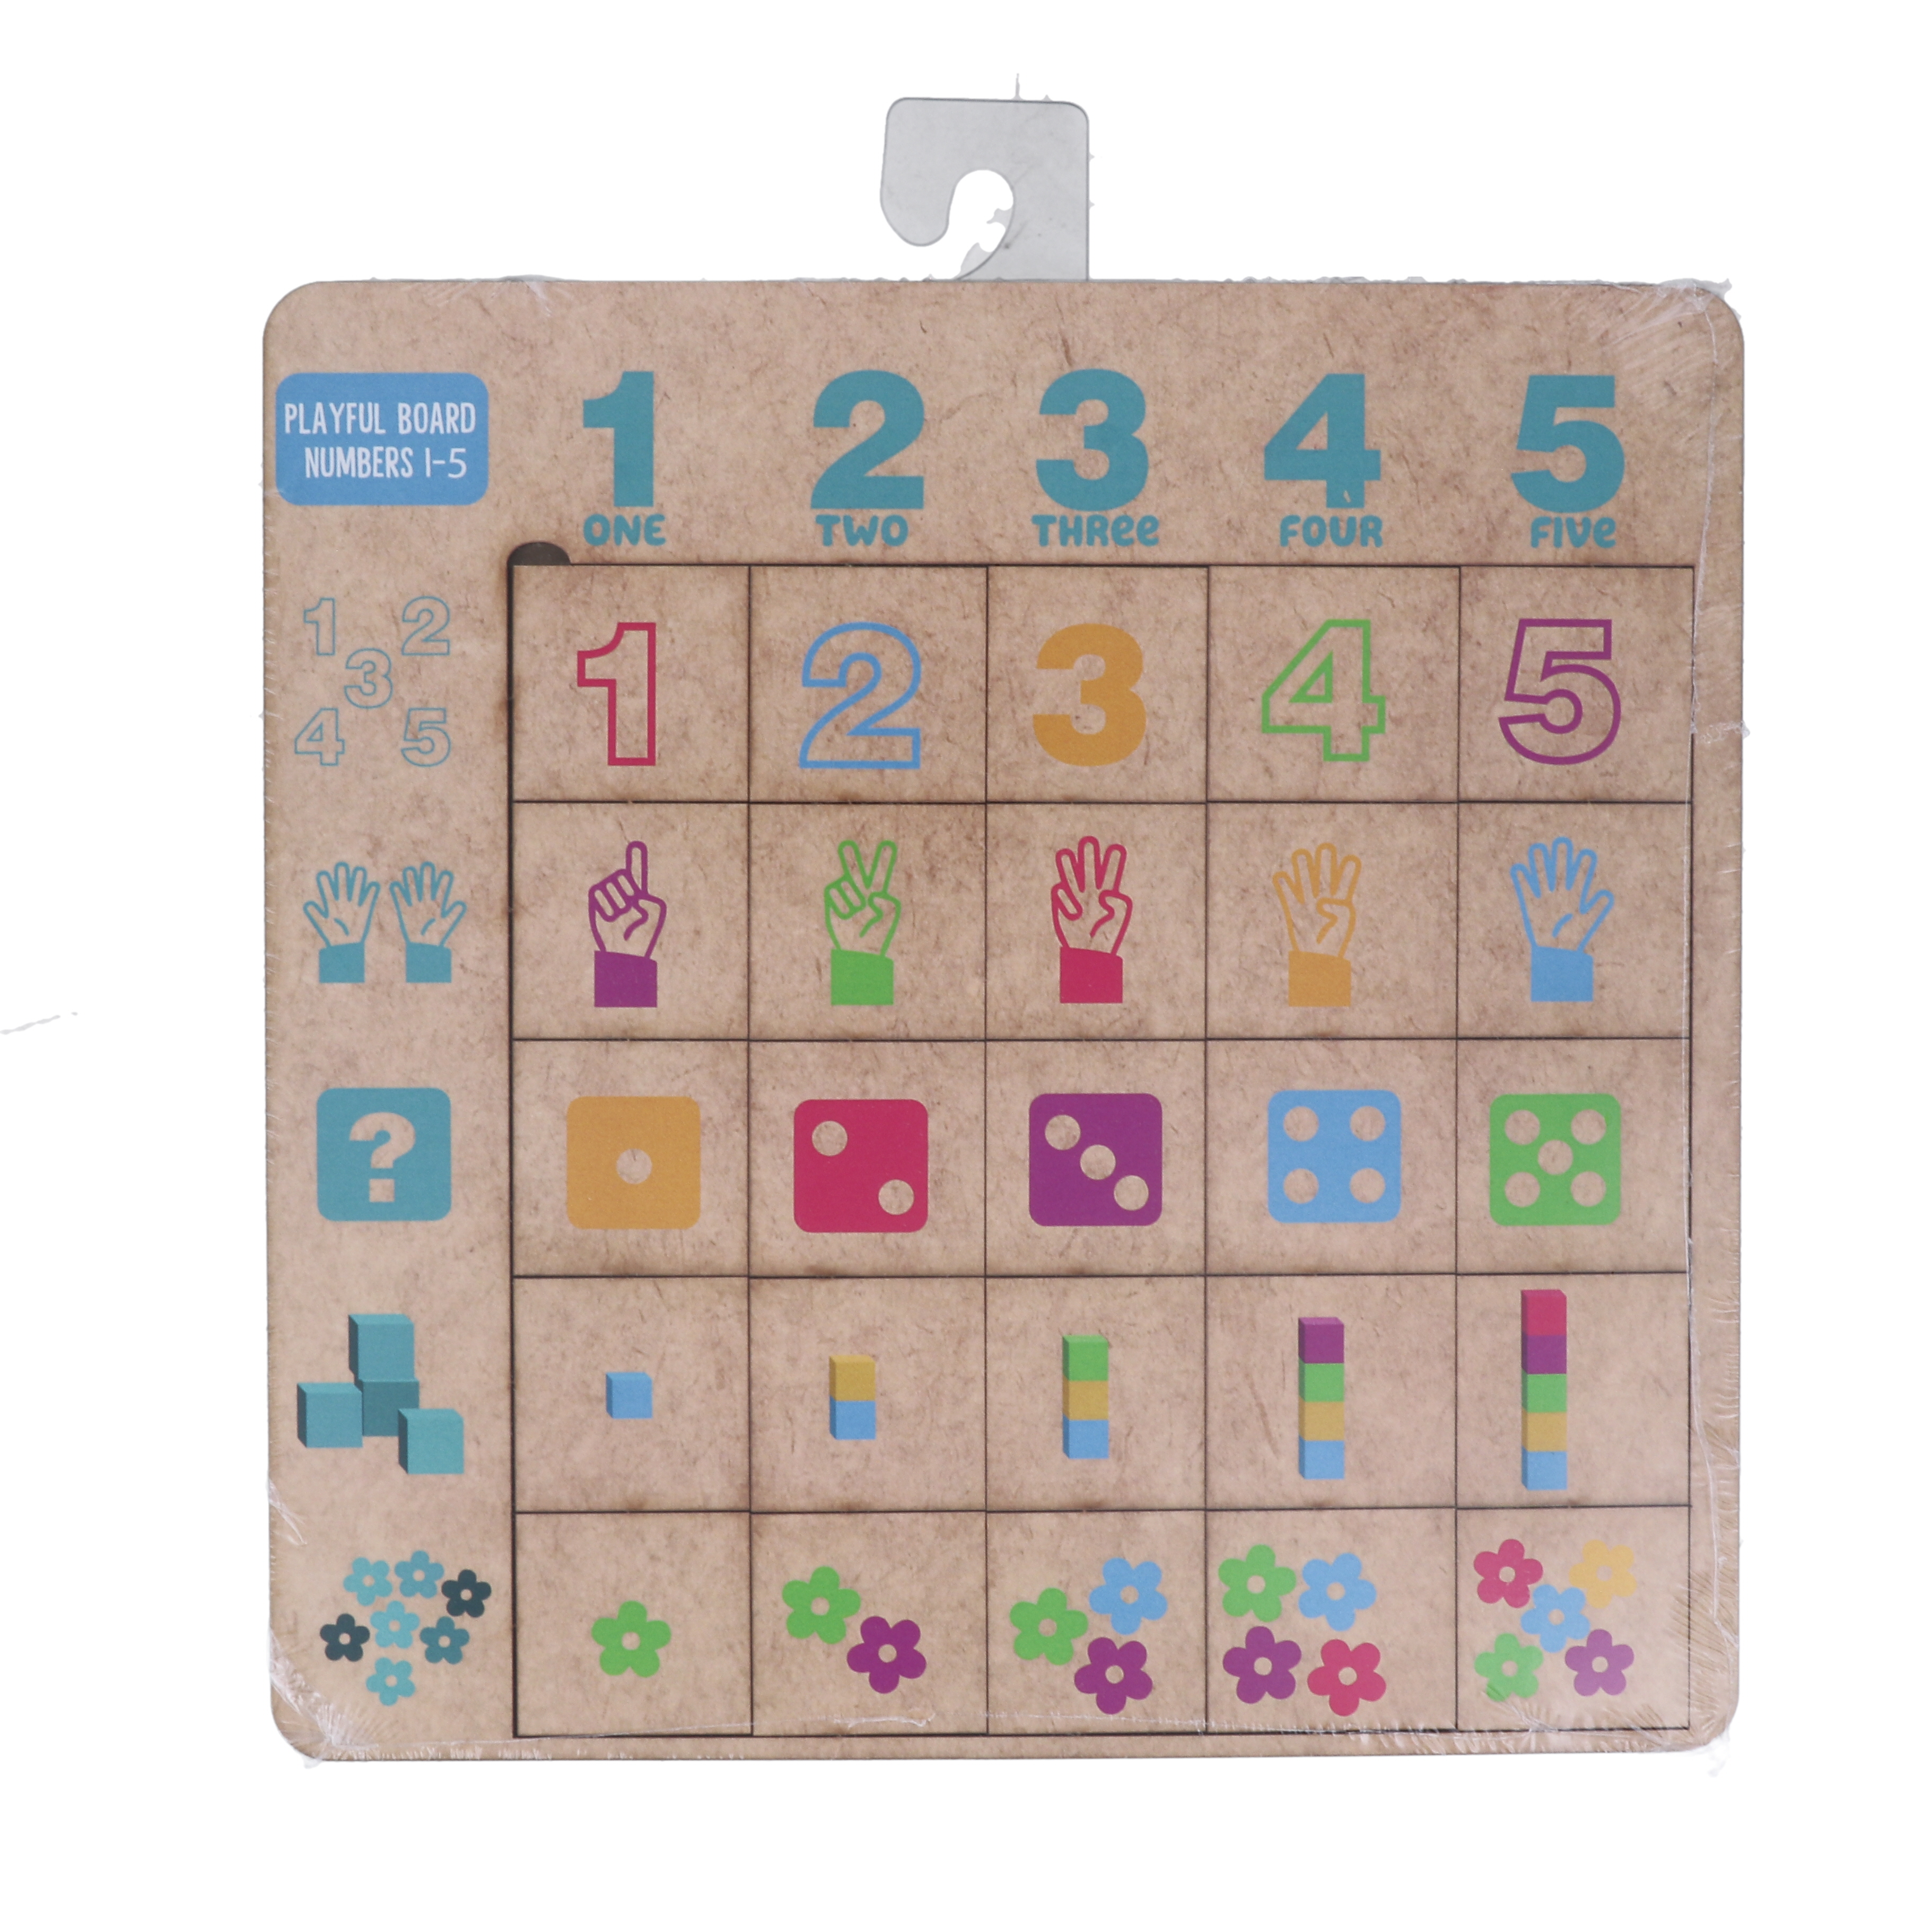 WOODEN PLAYFUL BOARD NUMBERS